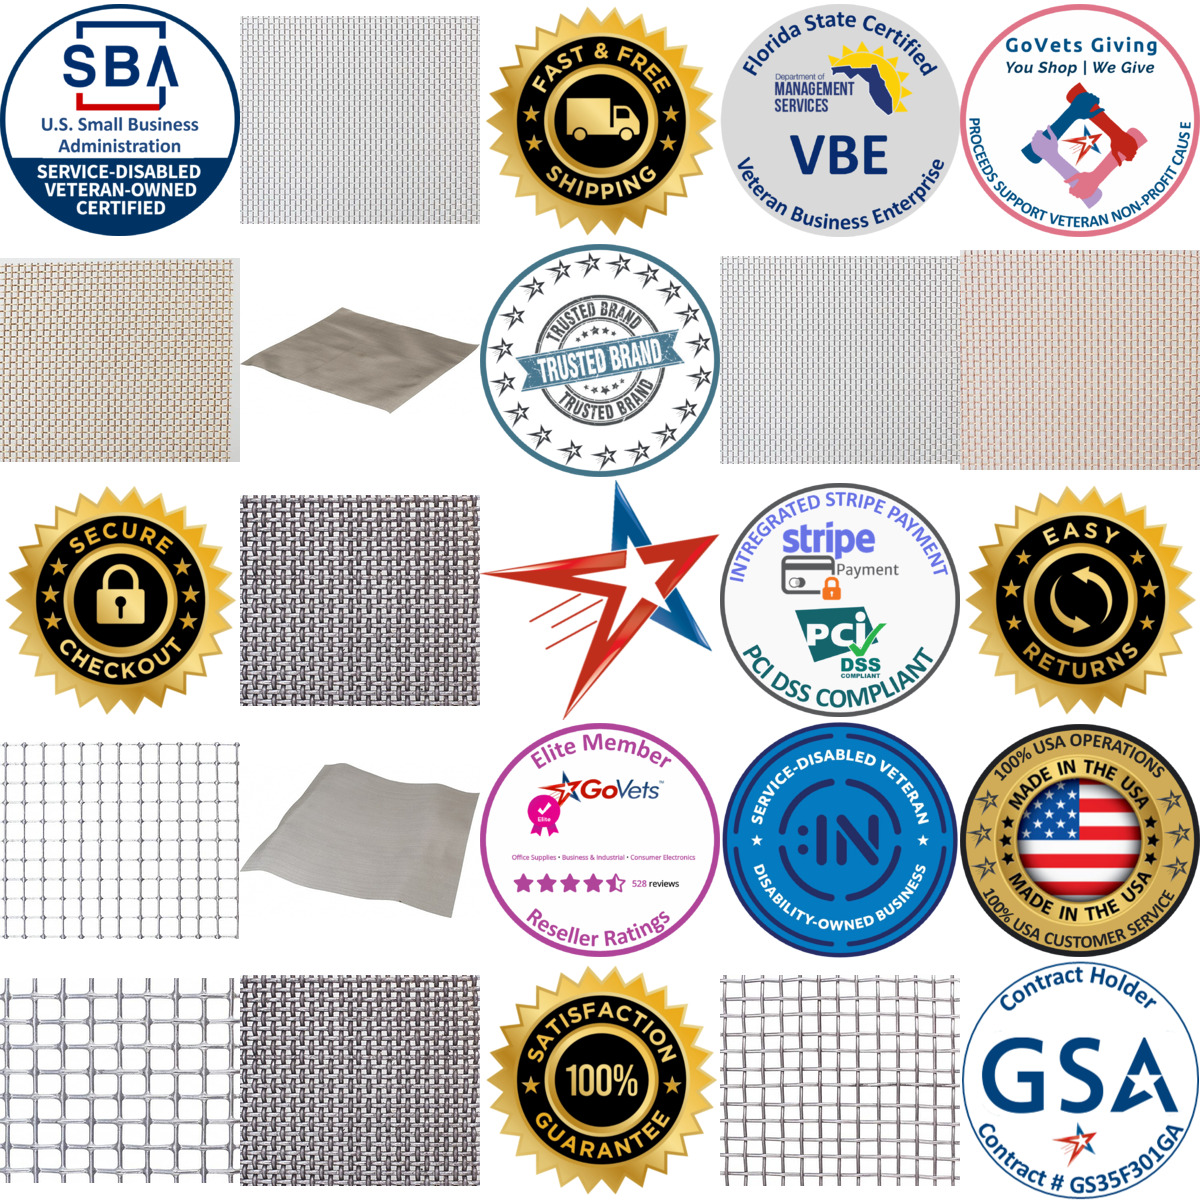 A selection of Wire Cloth products on GoVets